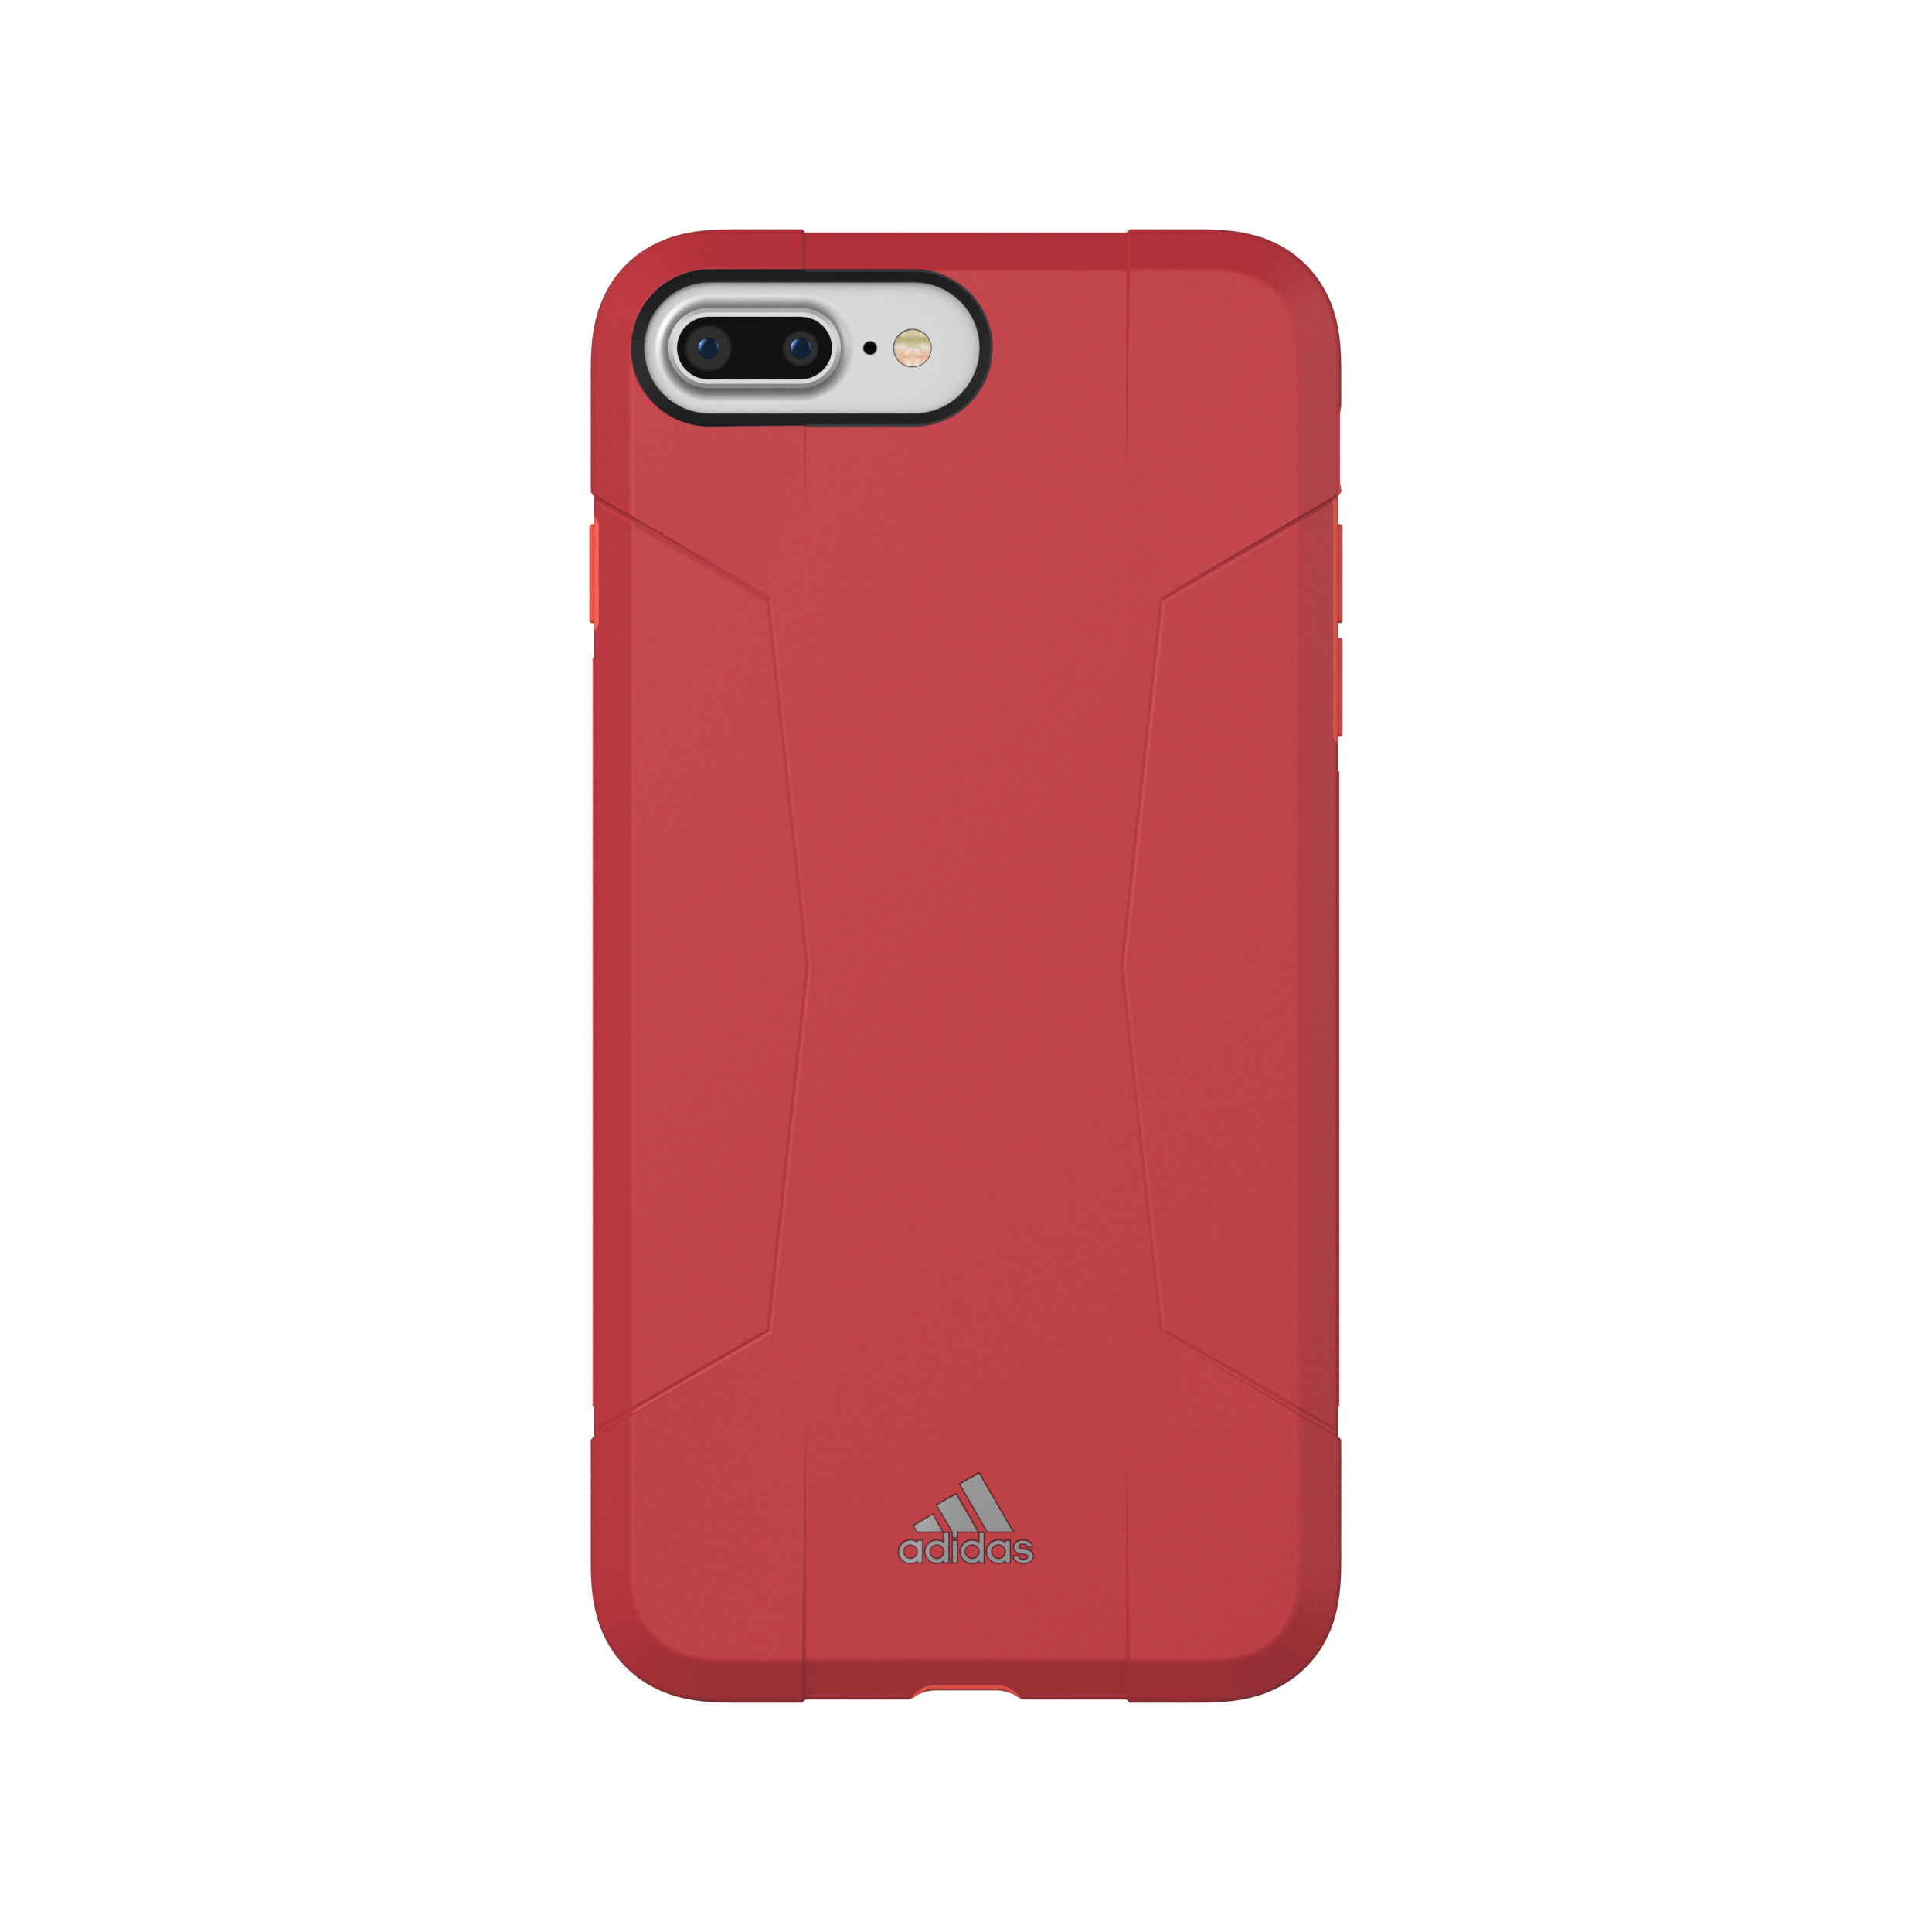 Backcover, 7, iPhone SPORT Pink ADIDAS 29590, 6s, iPhone iPhone Apple, 6, iPhone 8,